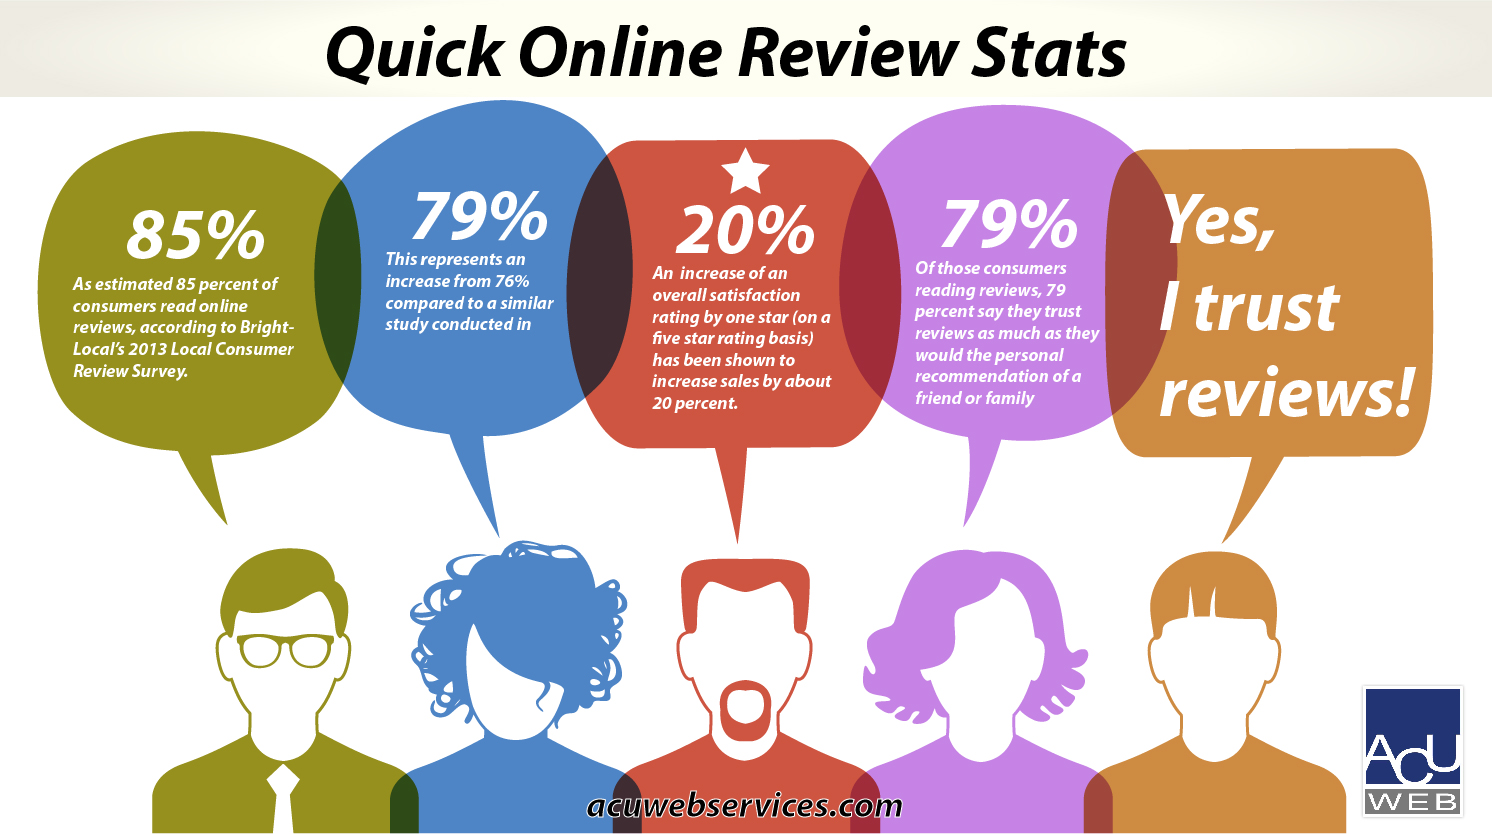 Buy your literature review online